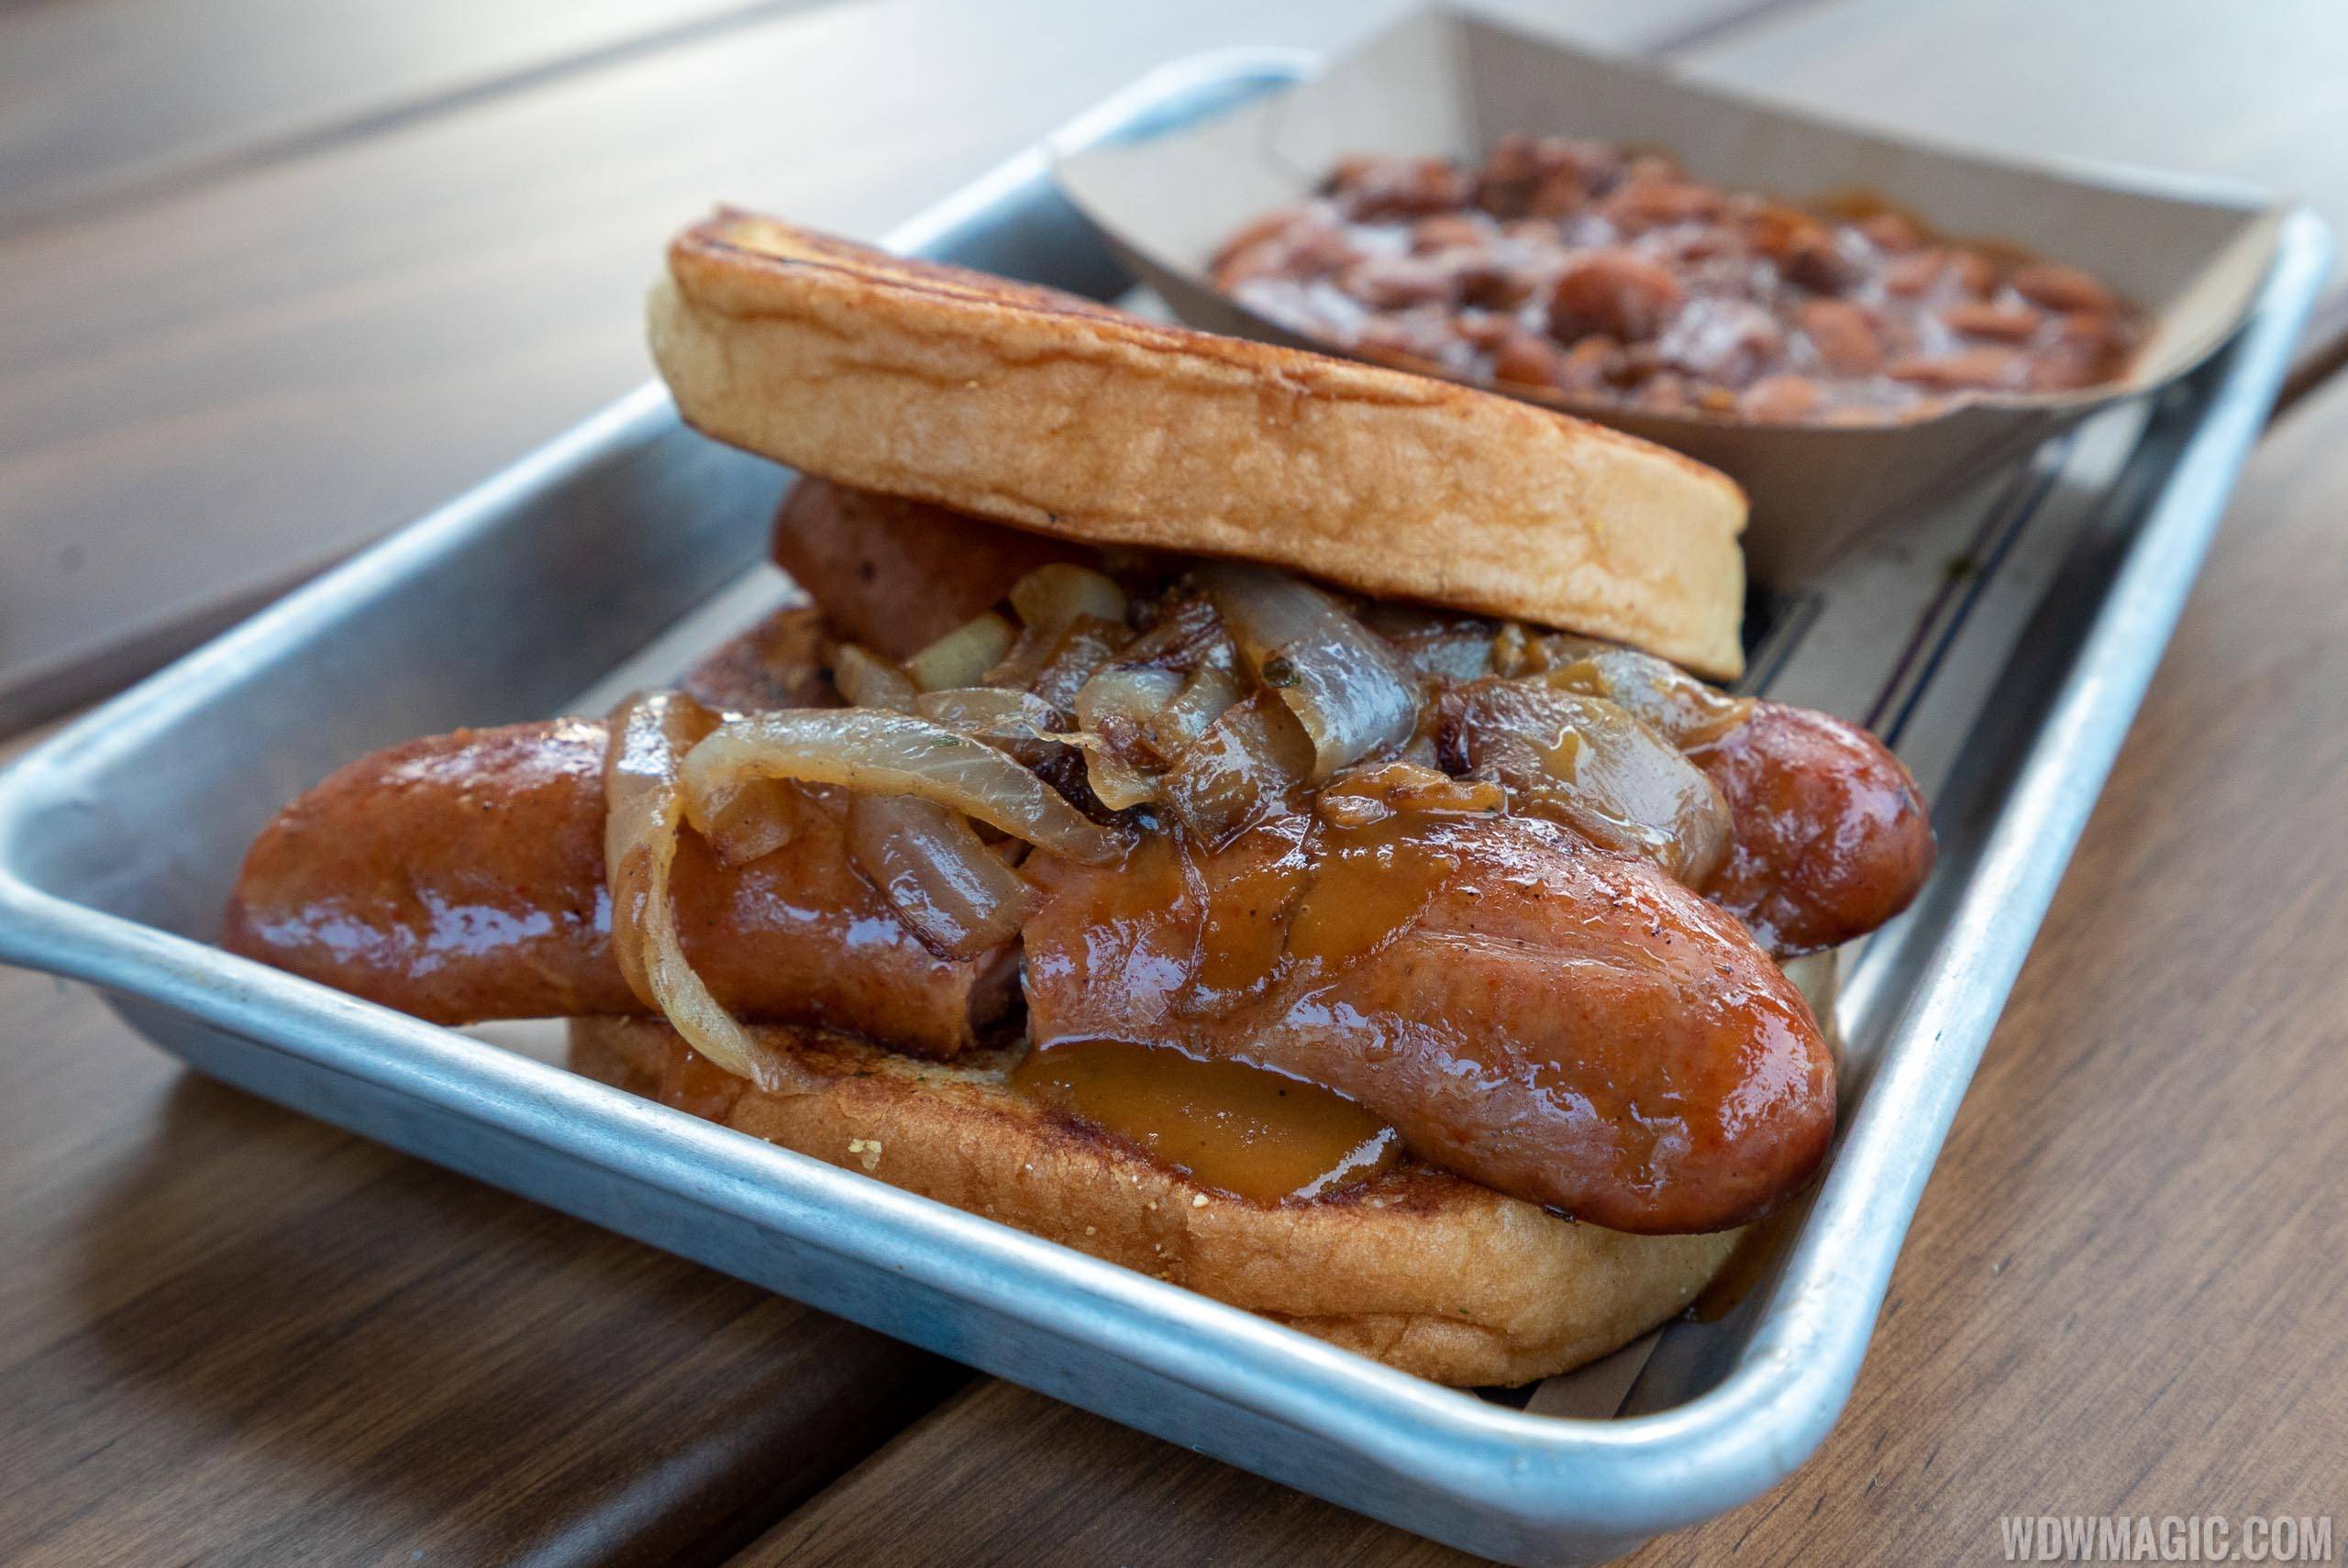 Regal Eagle Smokehouse - South Carolina Smoked Sausage Sandwich with Backed Beans and Burnt Ends